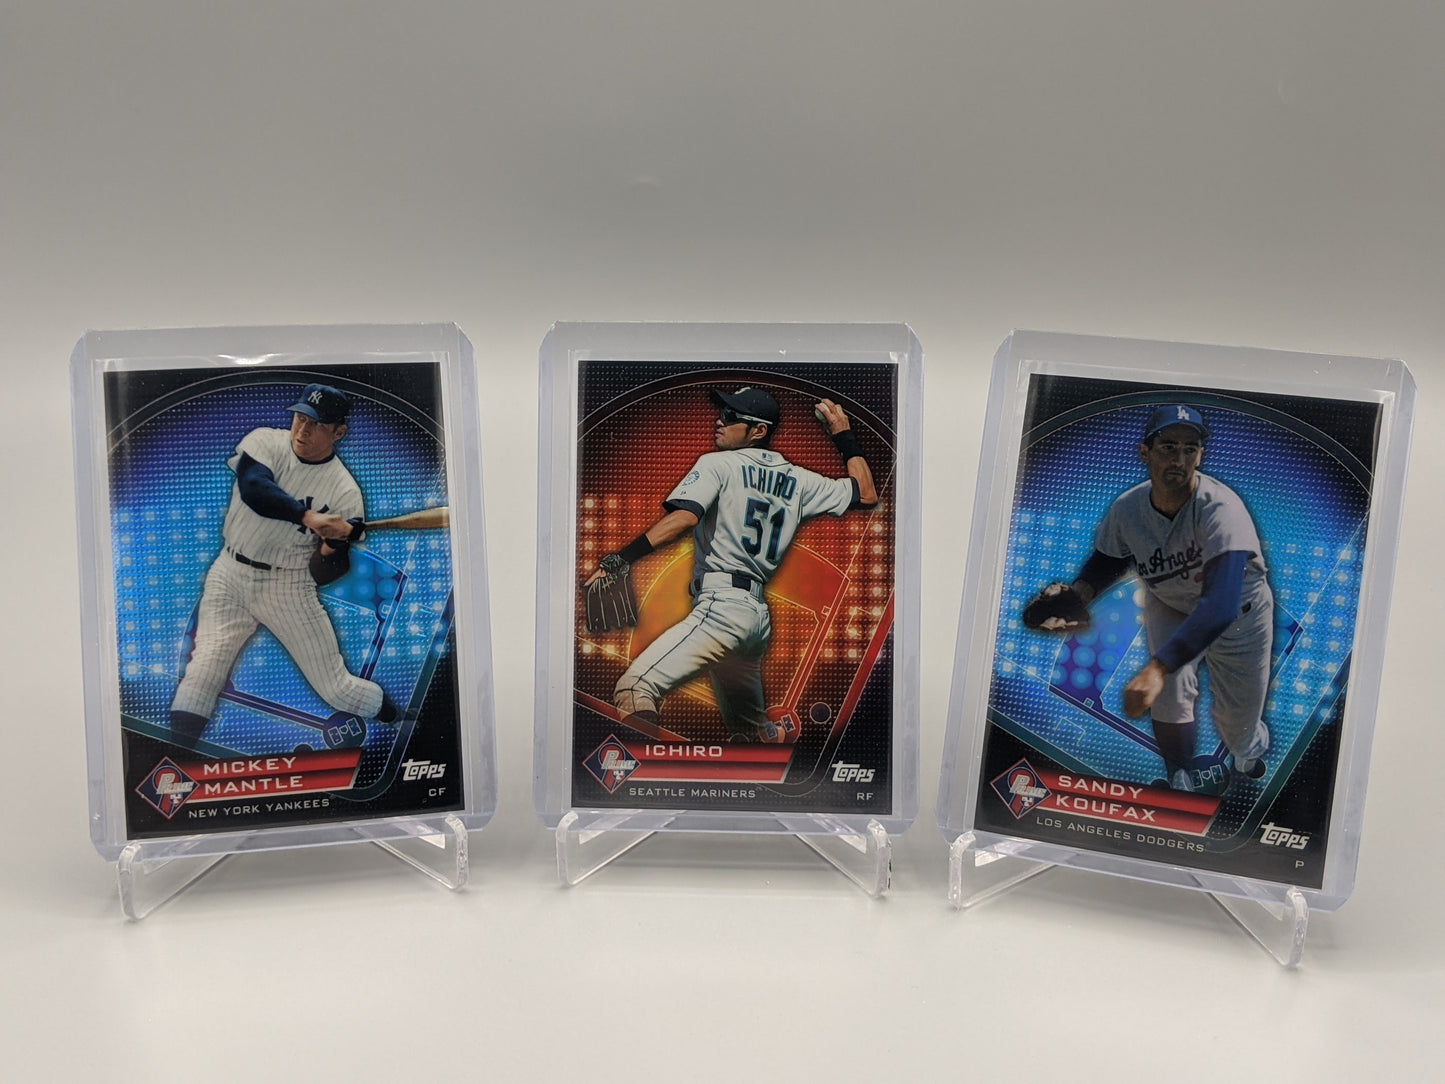 2011 Topps Prime 9 Complete Set (9) Cards, Mantle, Aaron, Koufax, Jeter + More